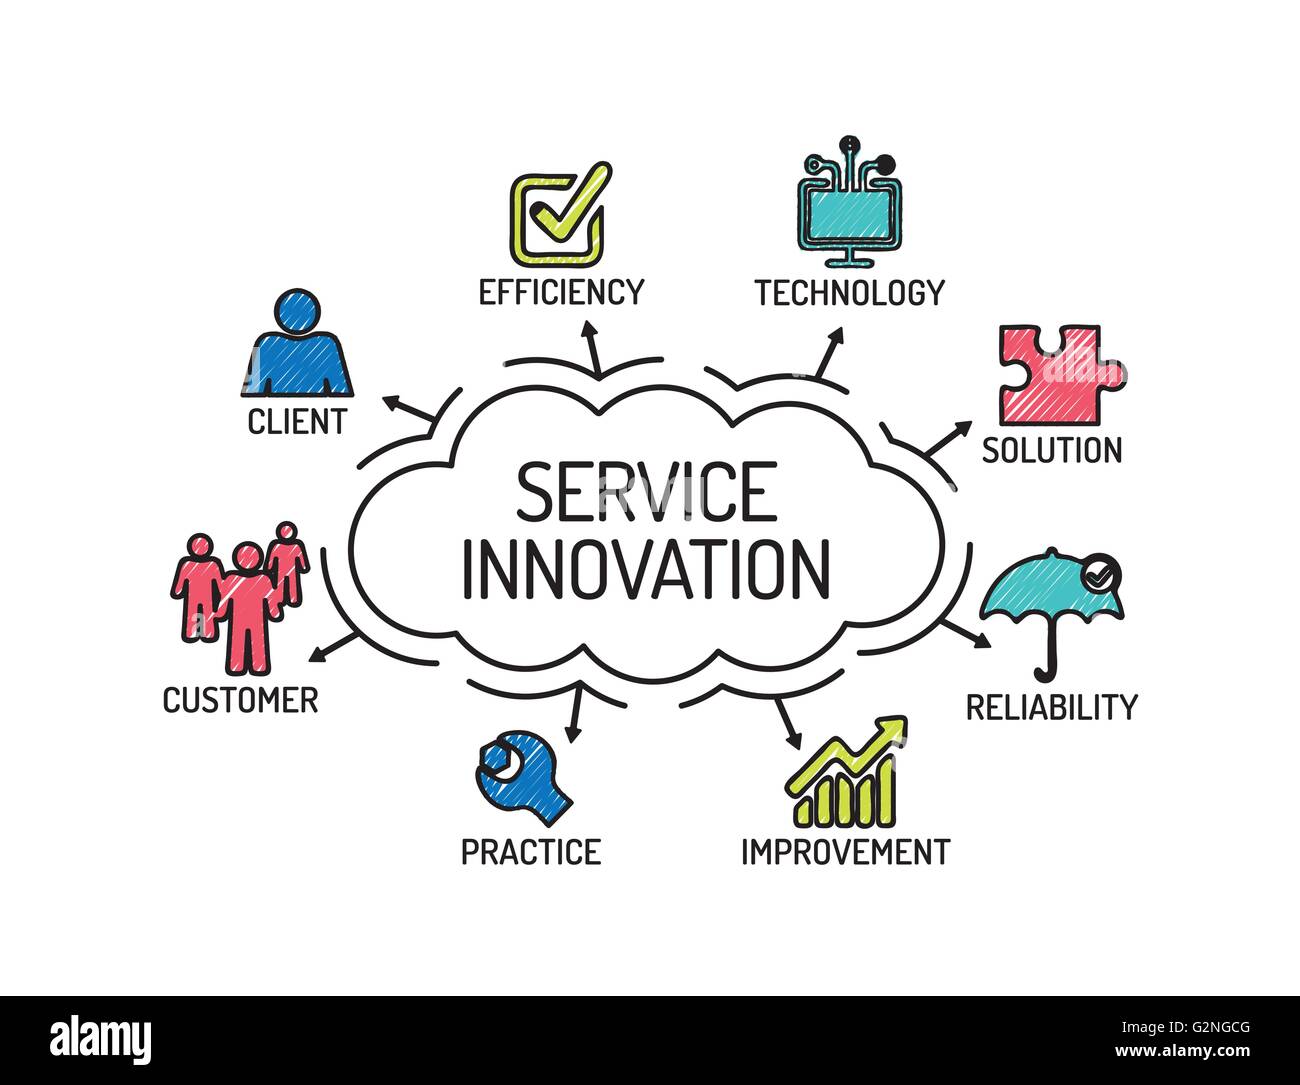 Service Innovation. Chart with keywords and icons. Sketch Stock Vector